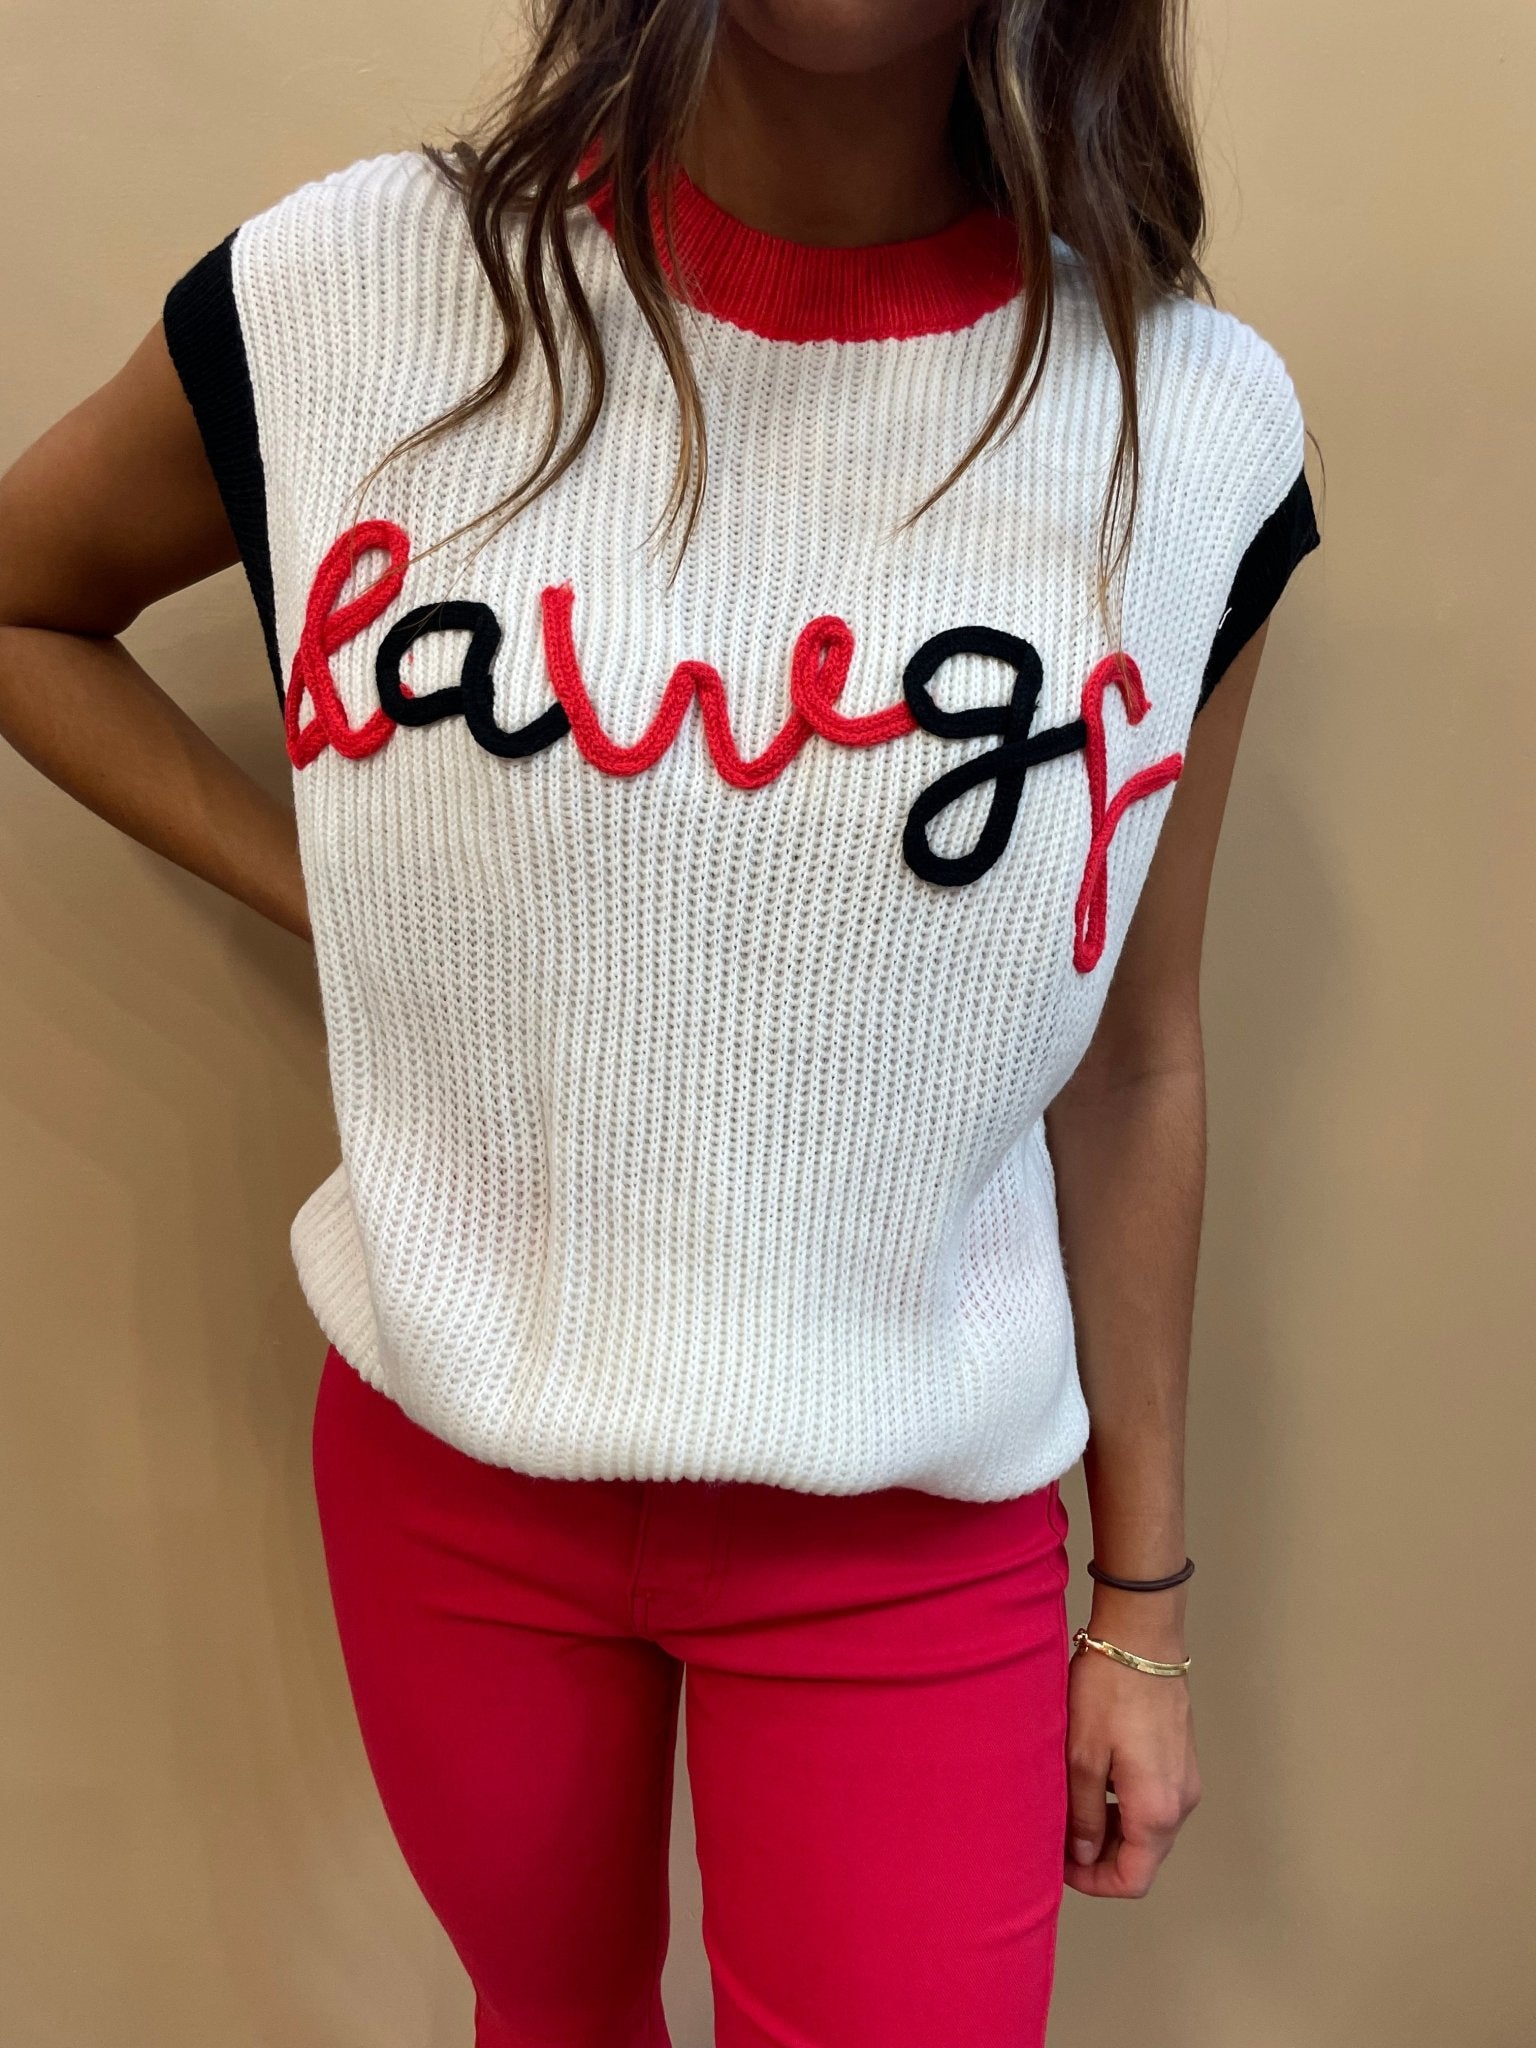 Dawgs Knit Top - Arete Style